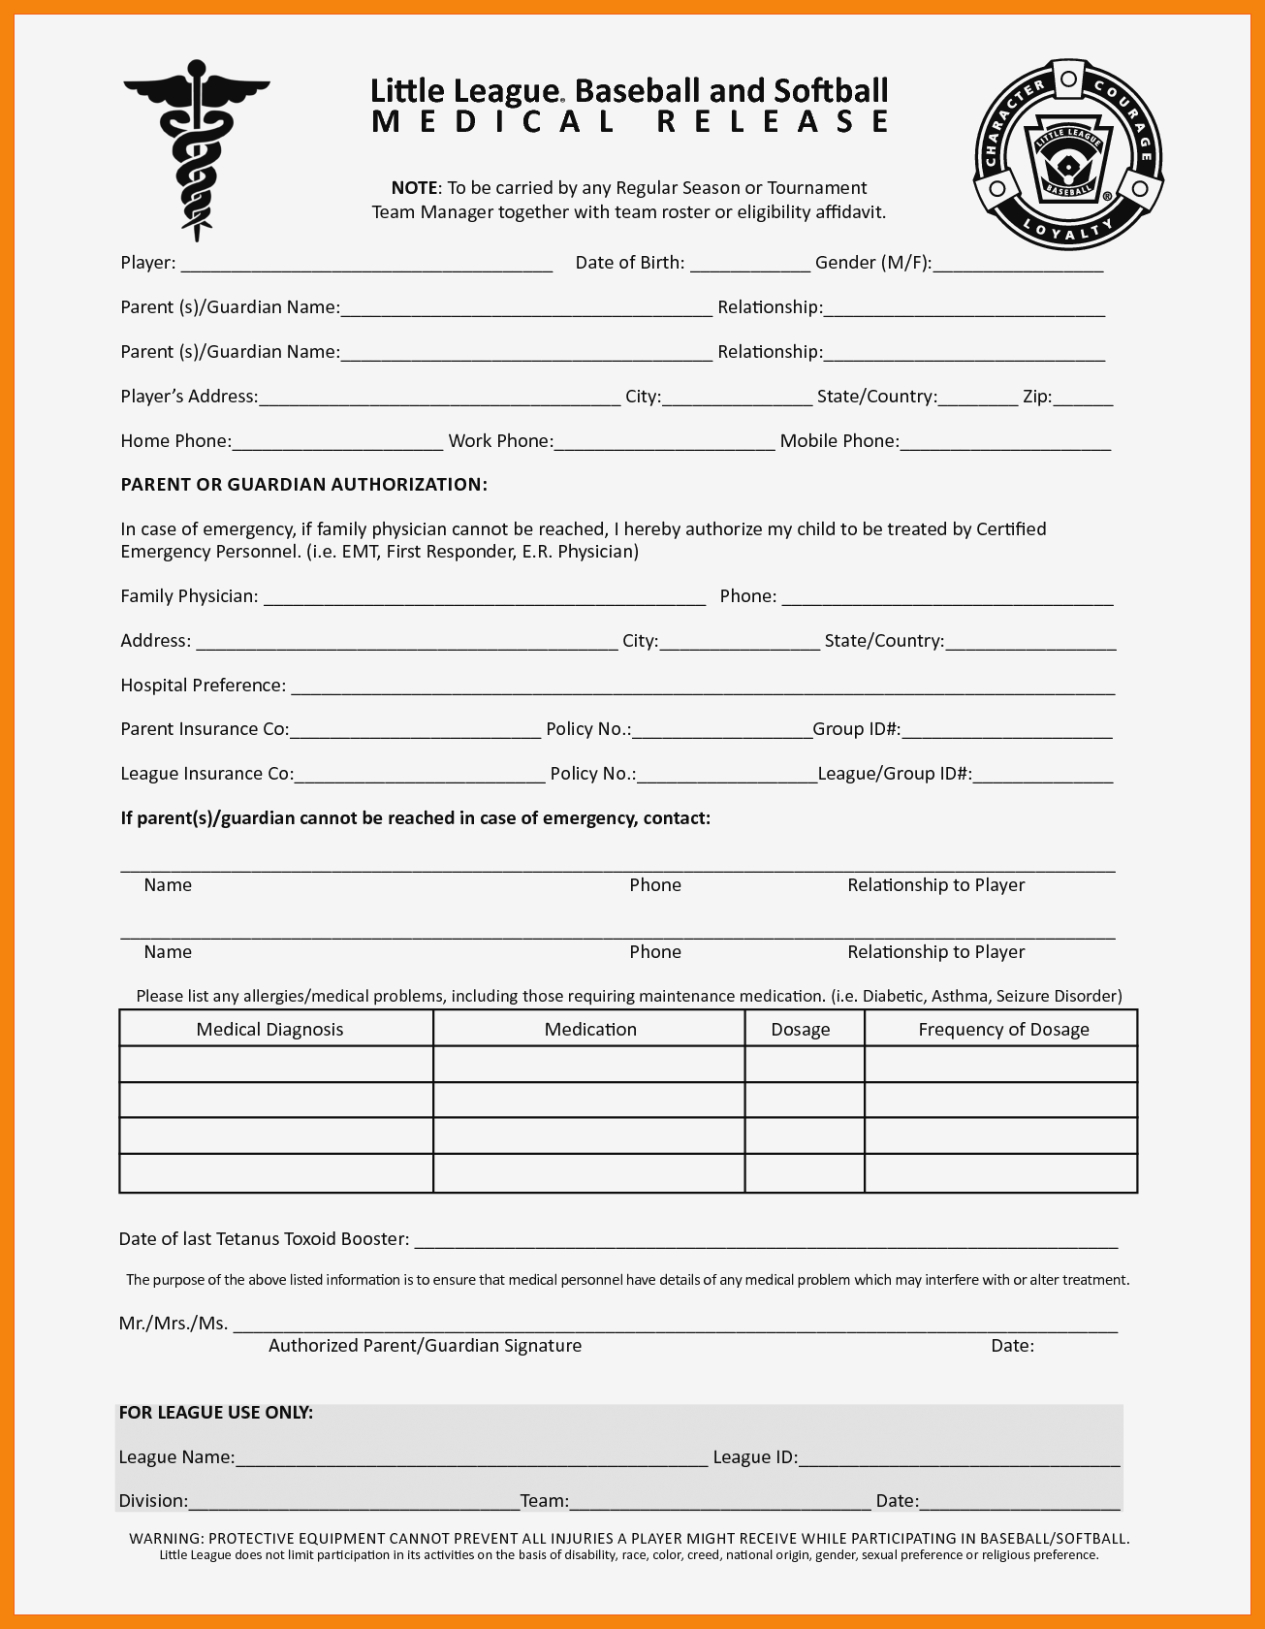 printable-medical-office-forms-printable-forms-free-online